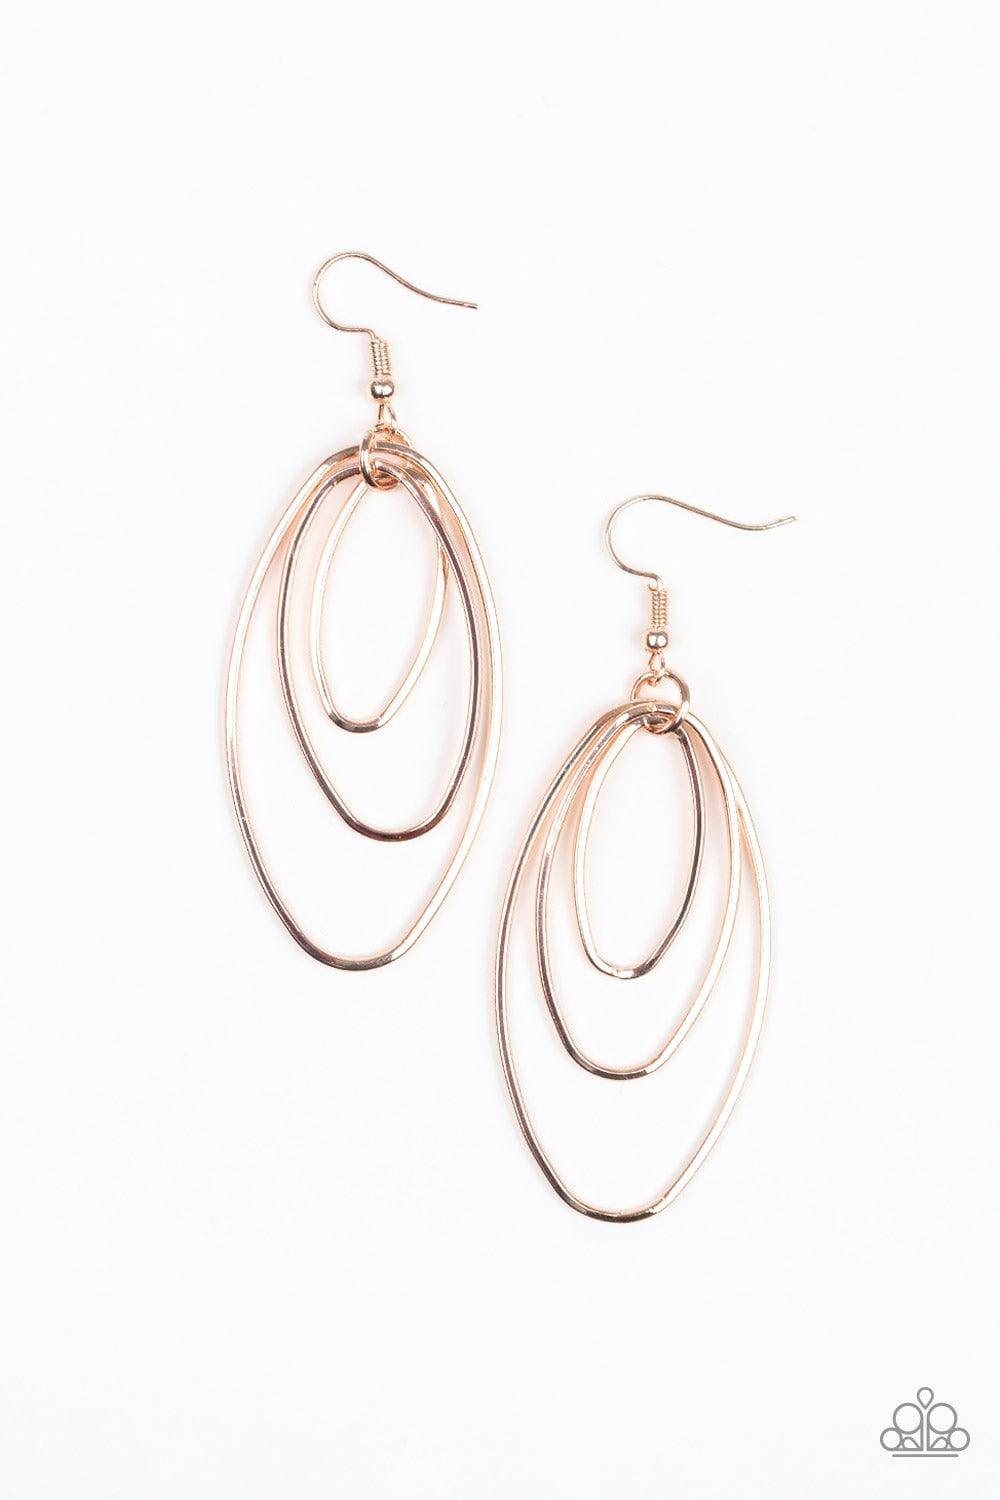 Paparazzi Accessories - All Oval The Place - Rose Gold Earrings - Bling by JessieK